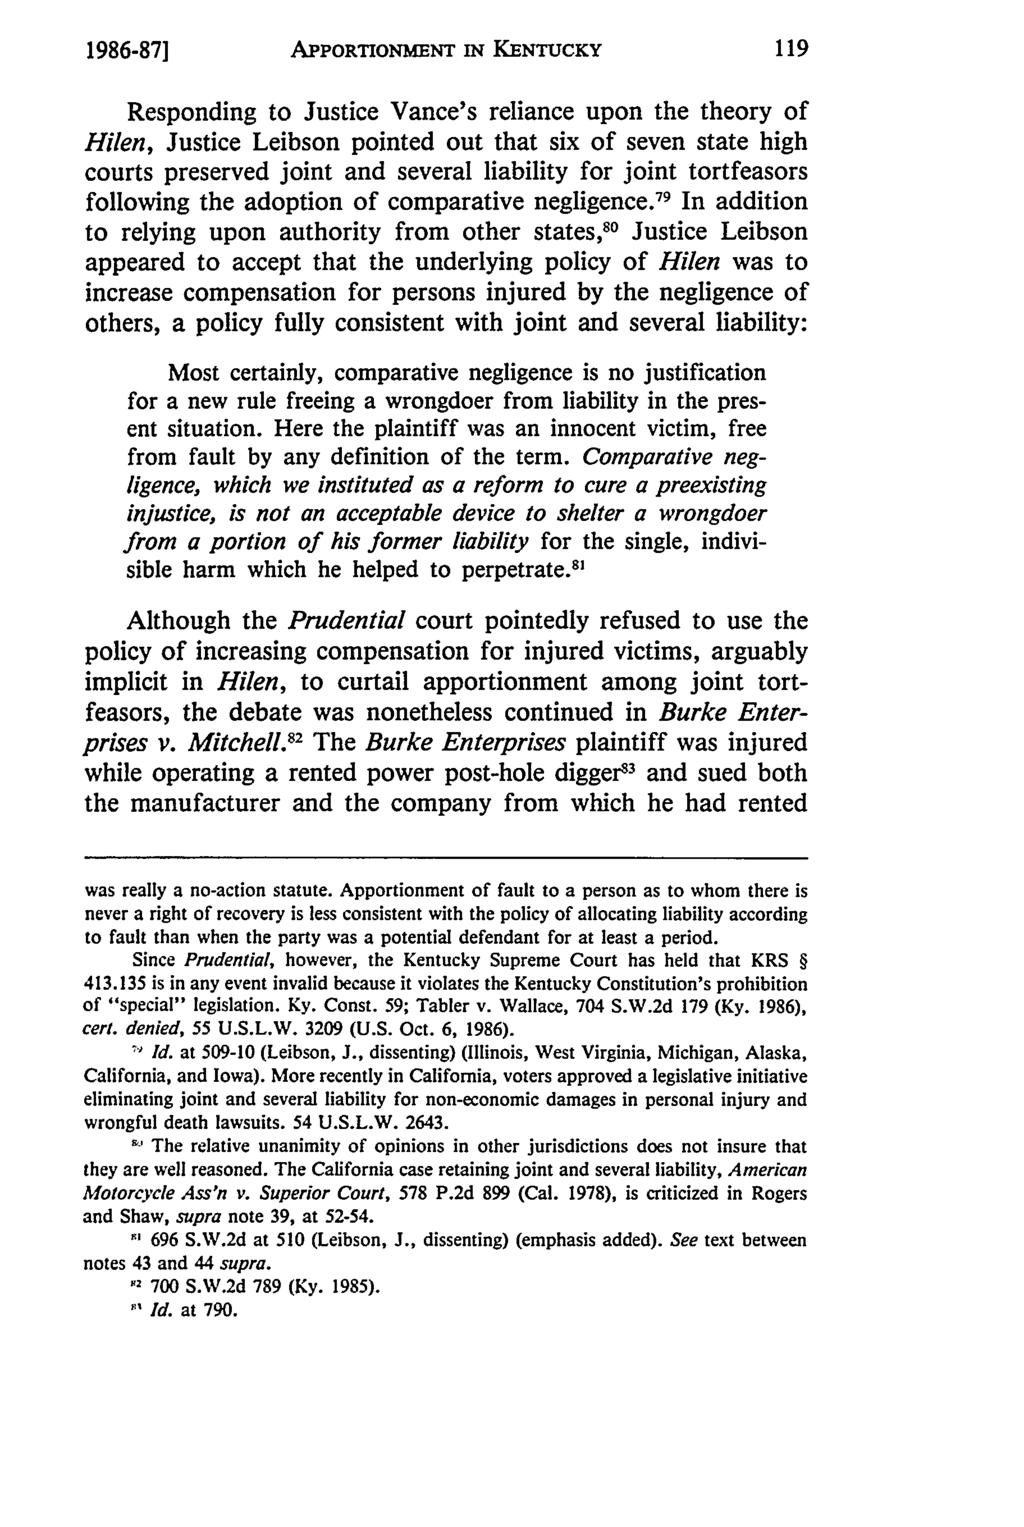 1986-871 APPORTIONMENT IN KENTUCKY Responding to Justice Vance's reliance upon the theory of Hilen, Justice Leibson pointed out that six of seven state high courts preserved joint and several